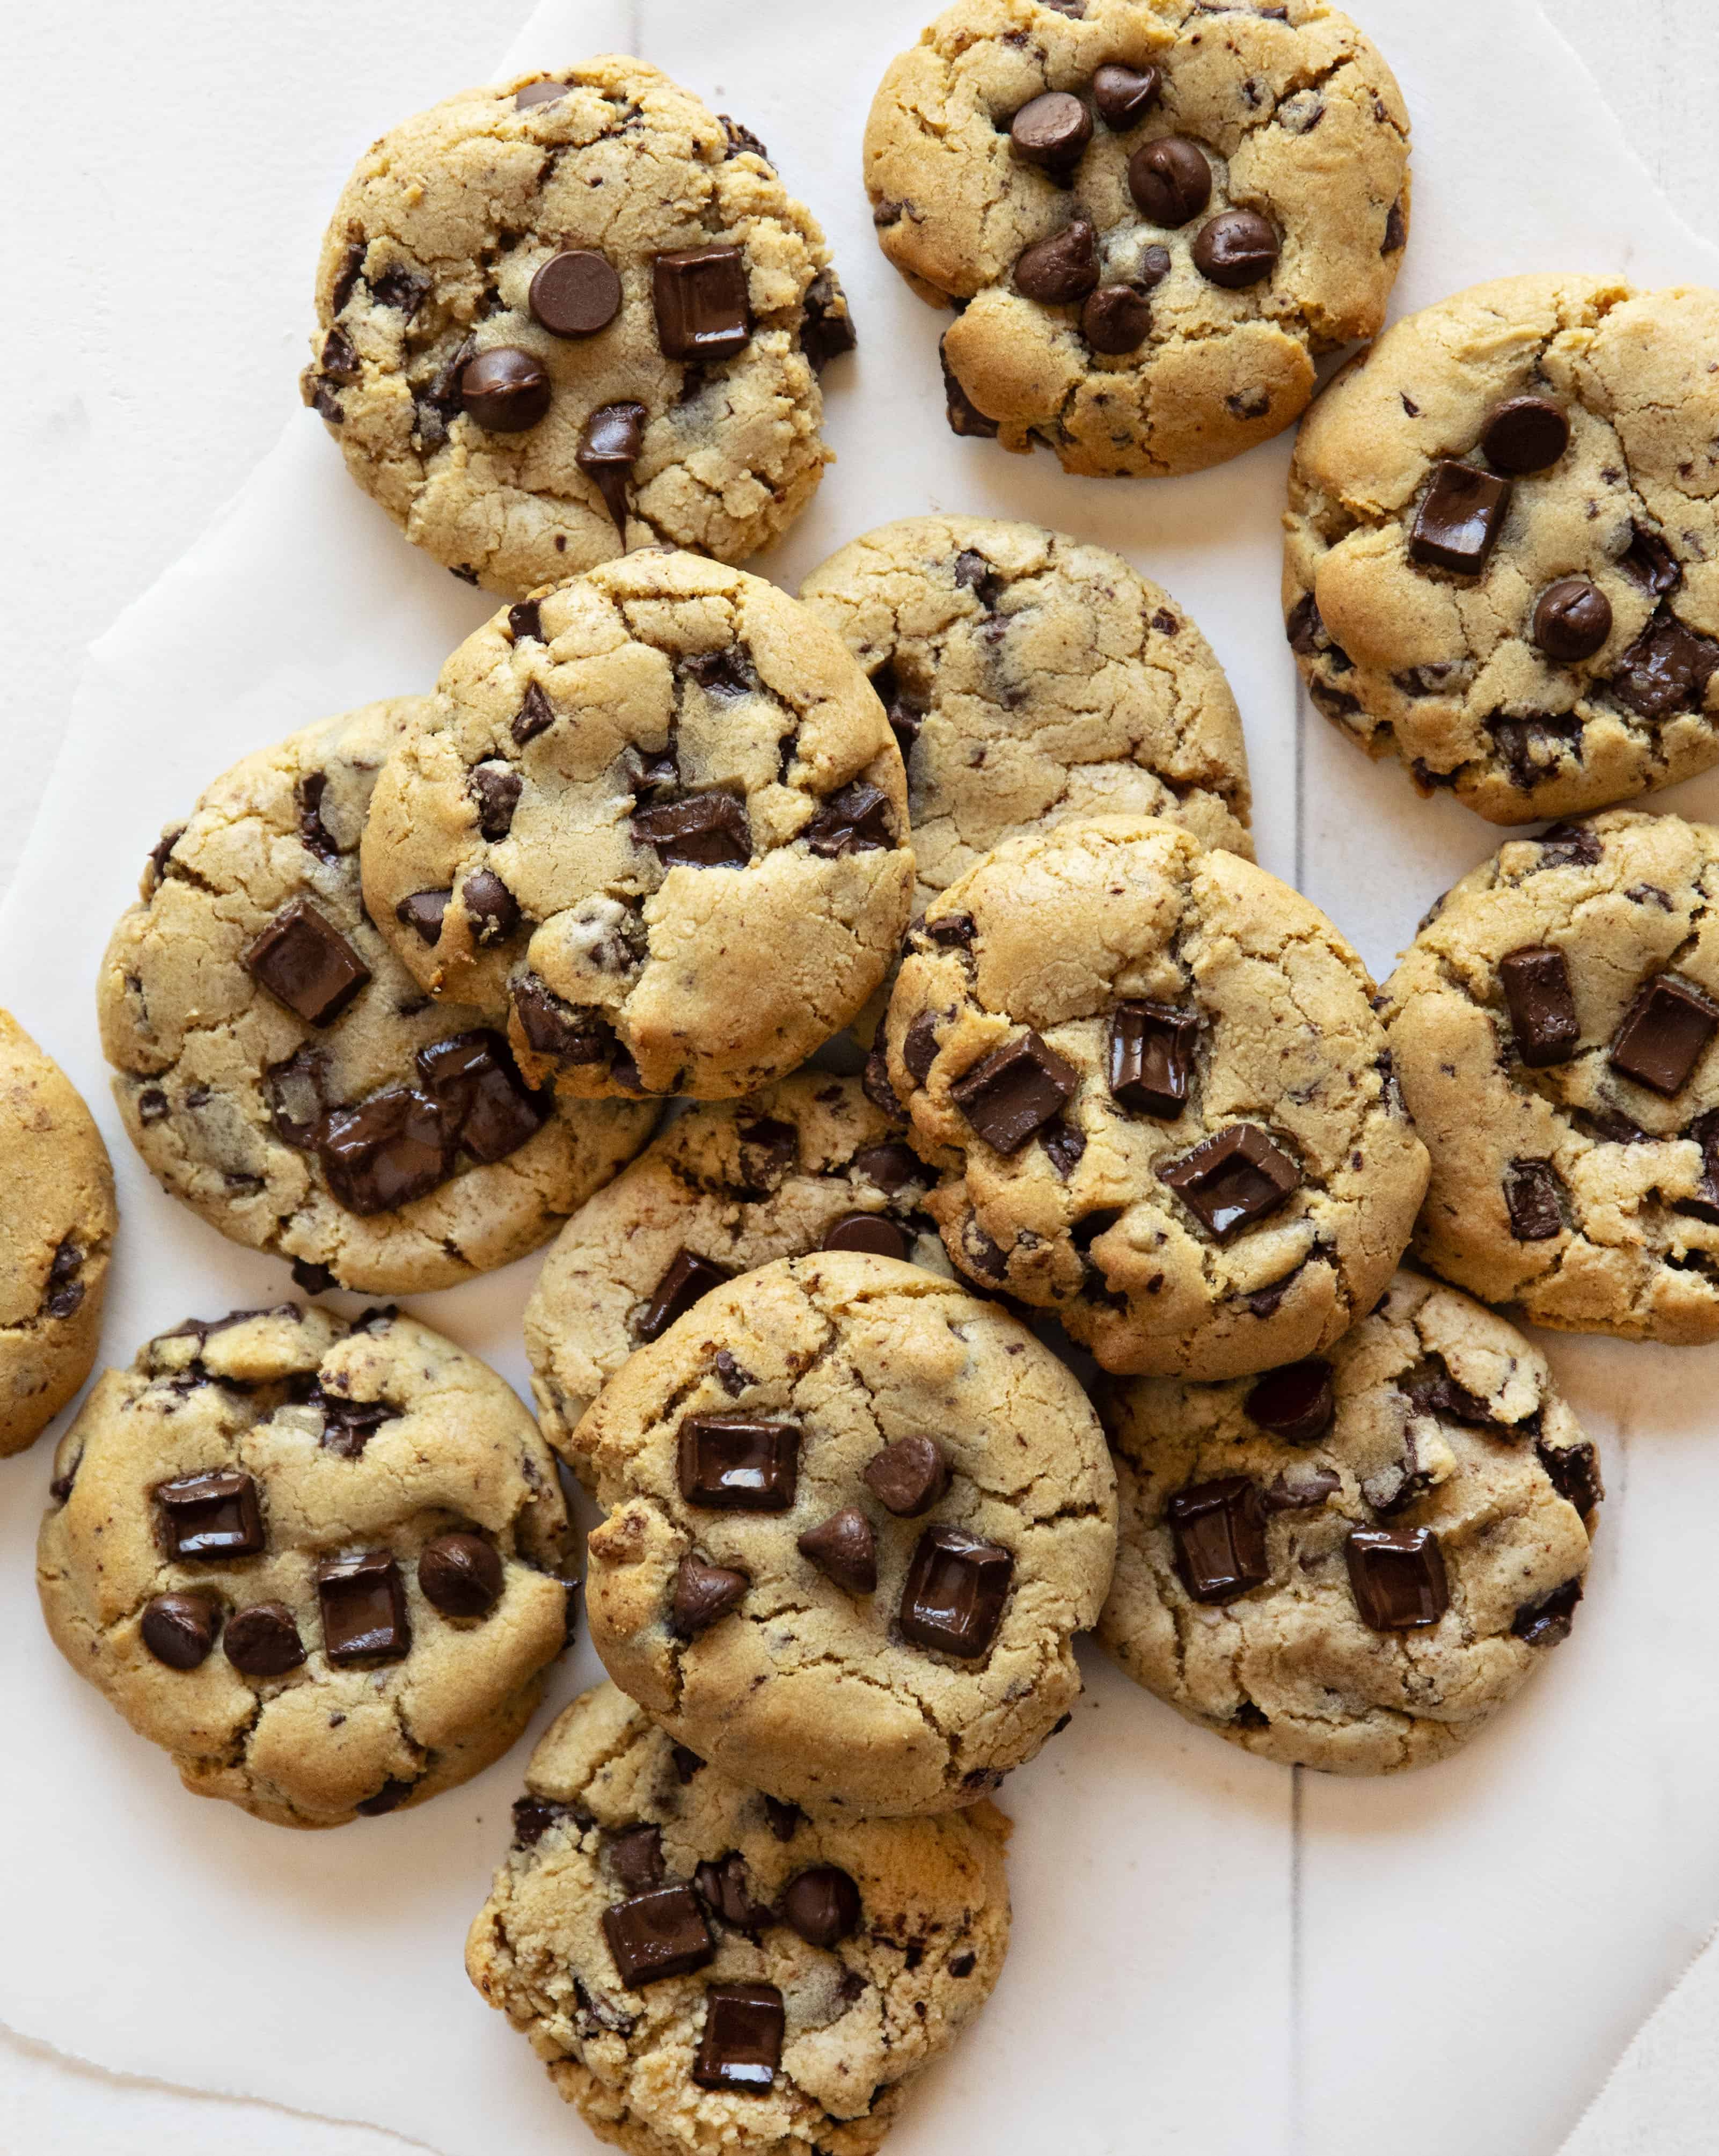 Chocolate Chip Cookies from Overhead